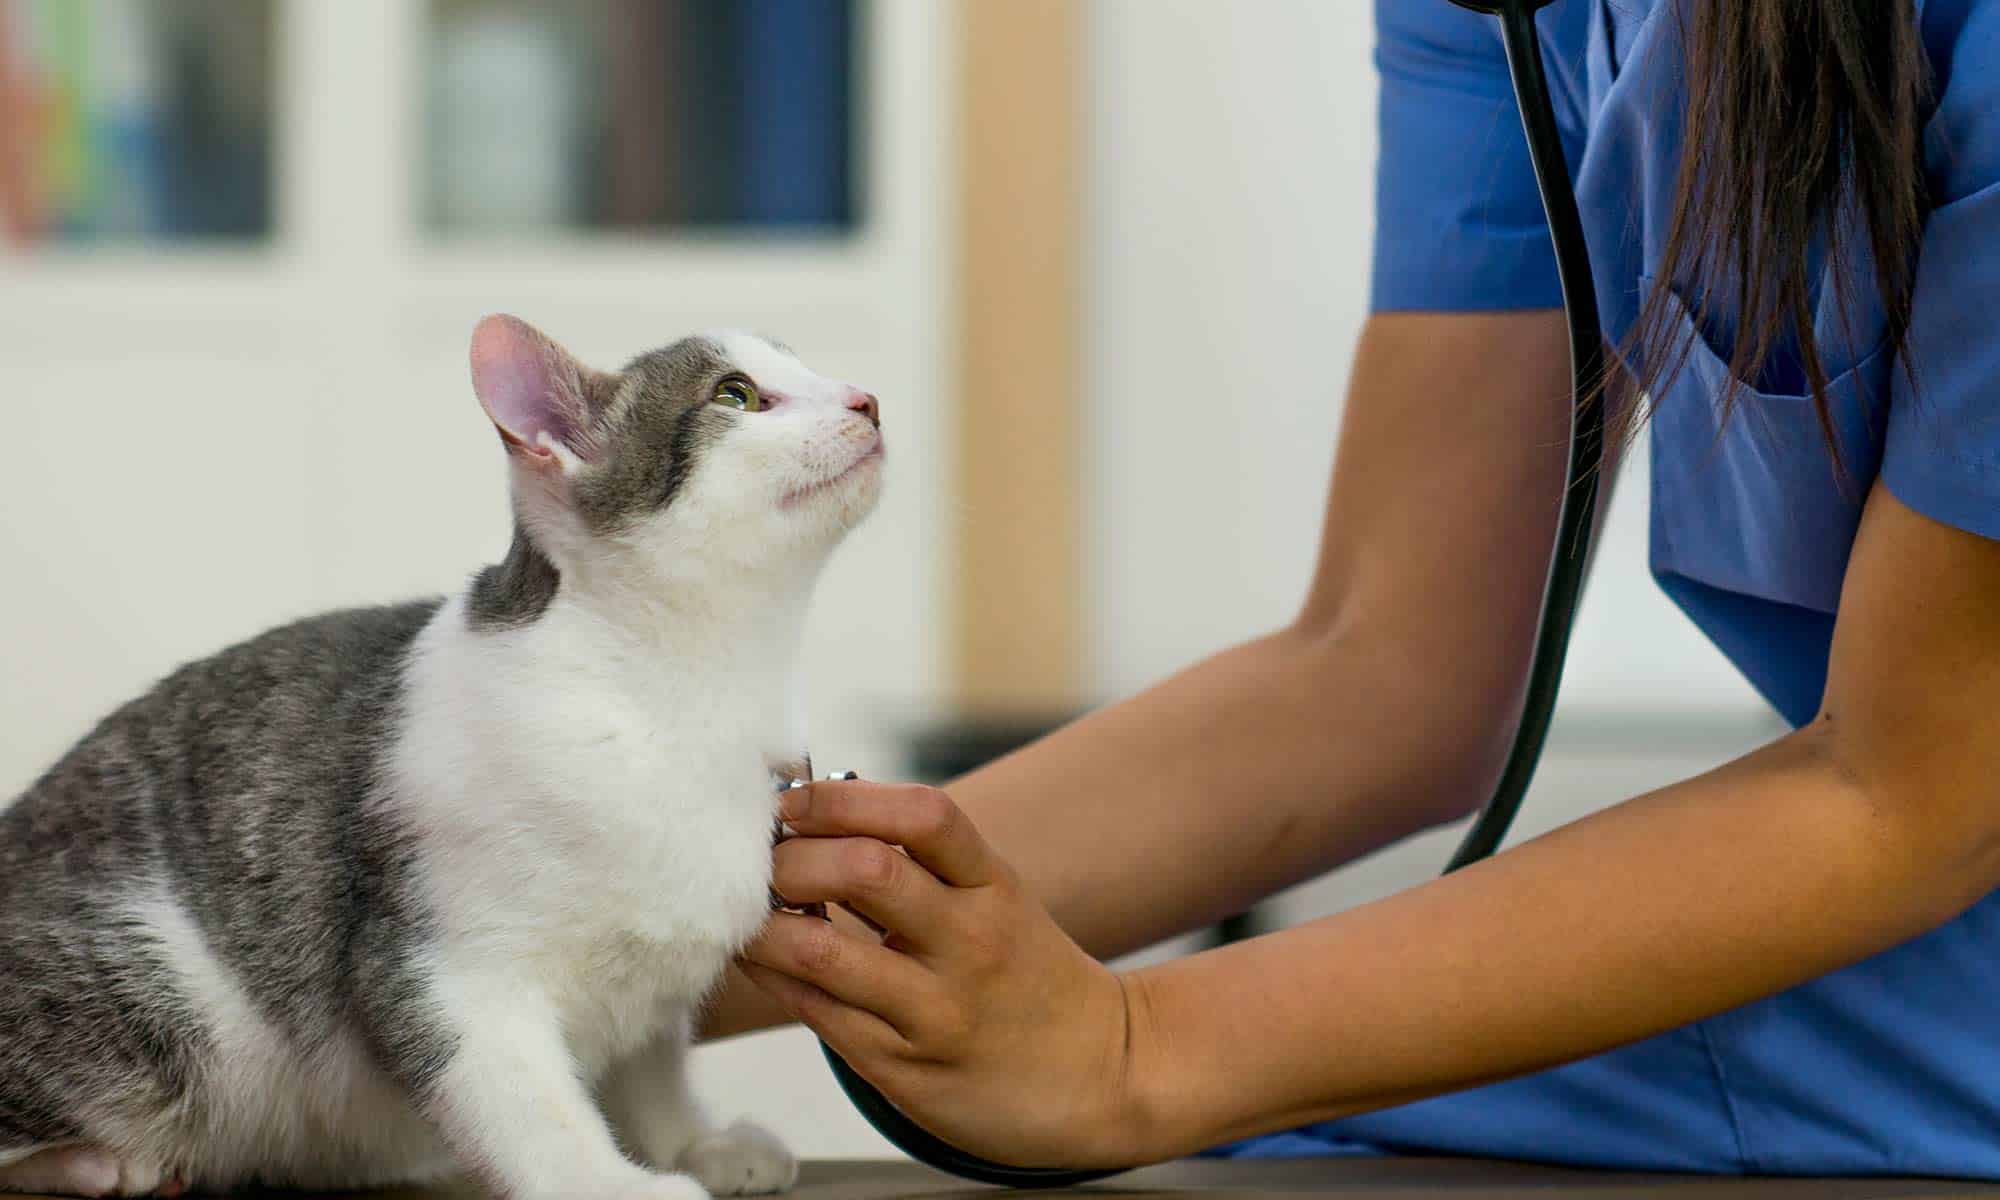 A cat being examined